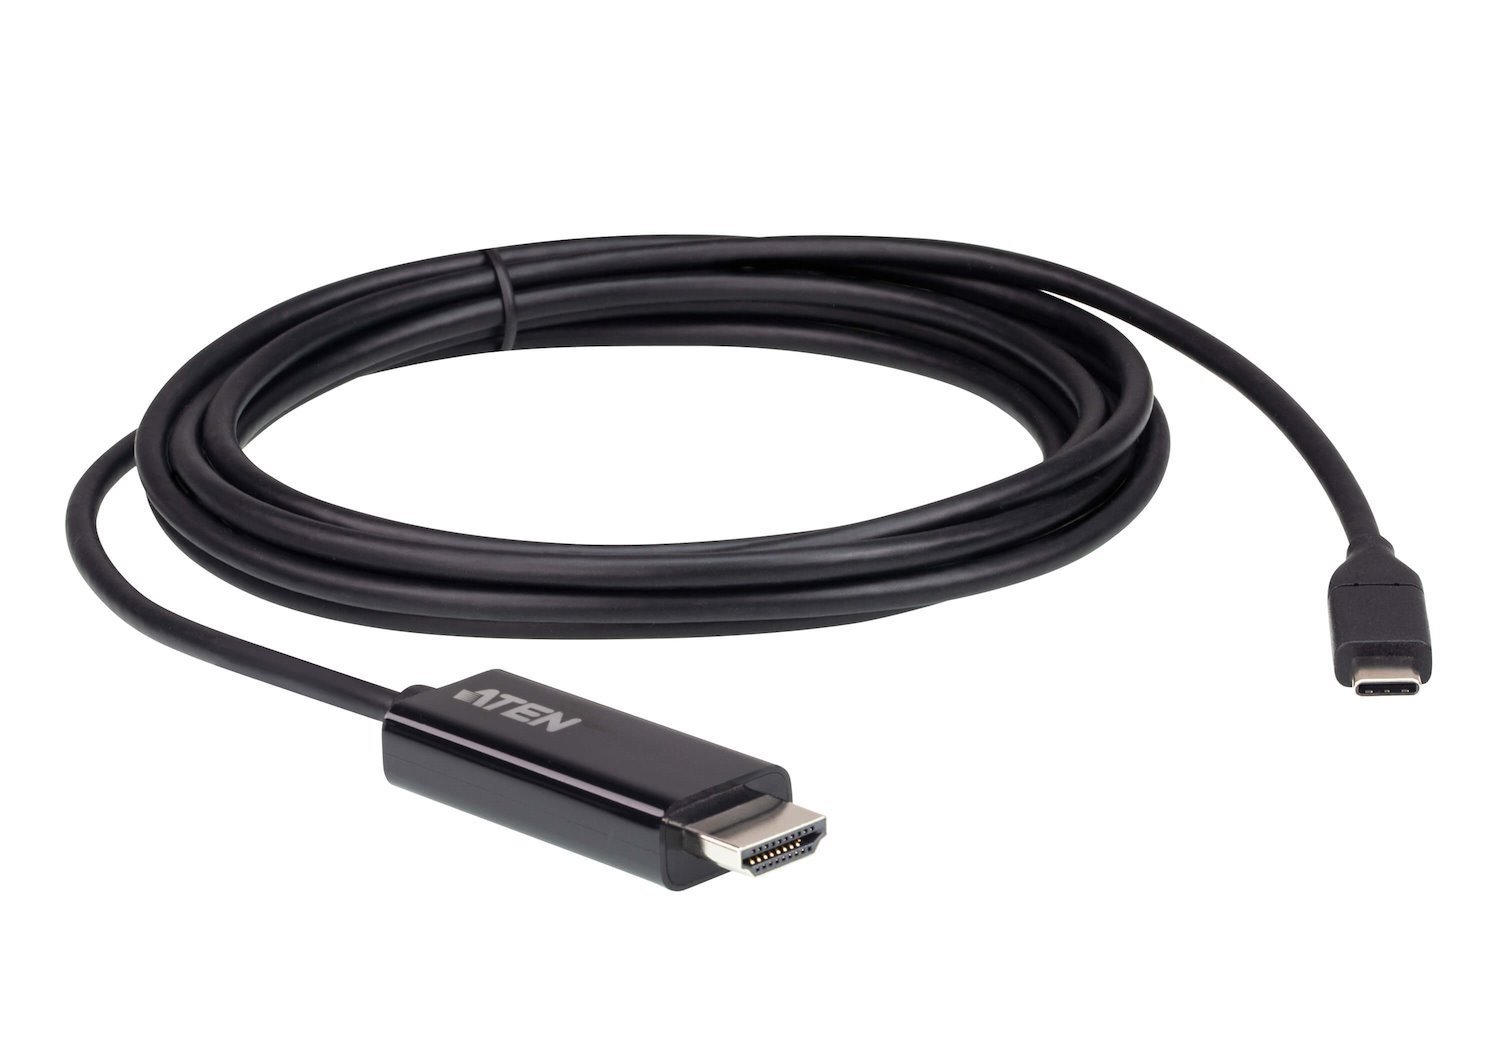 Aten Uc3238 Usb-C To Hdmi 4K 2.7M Cable No WTY